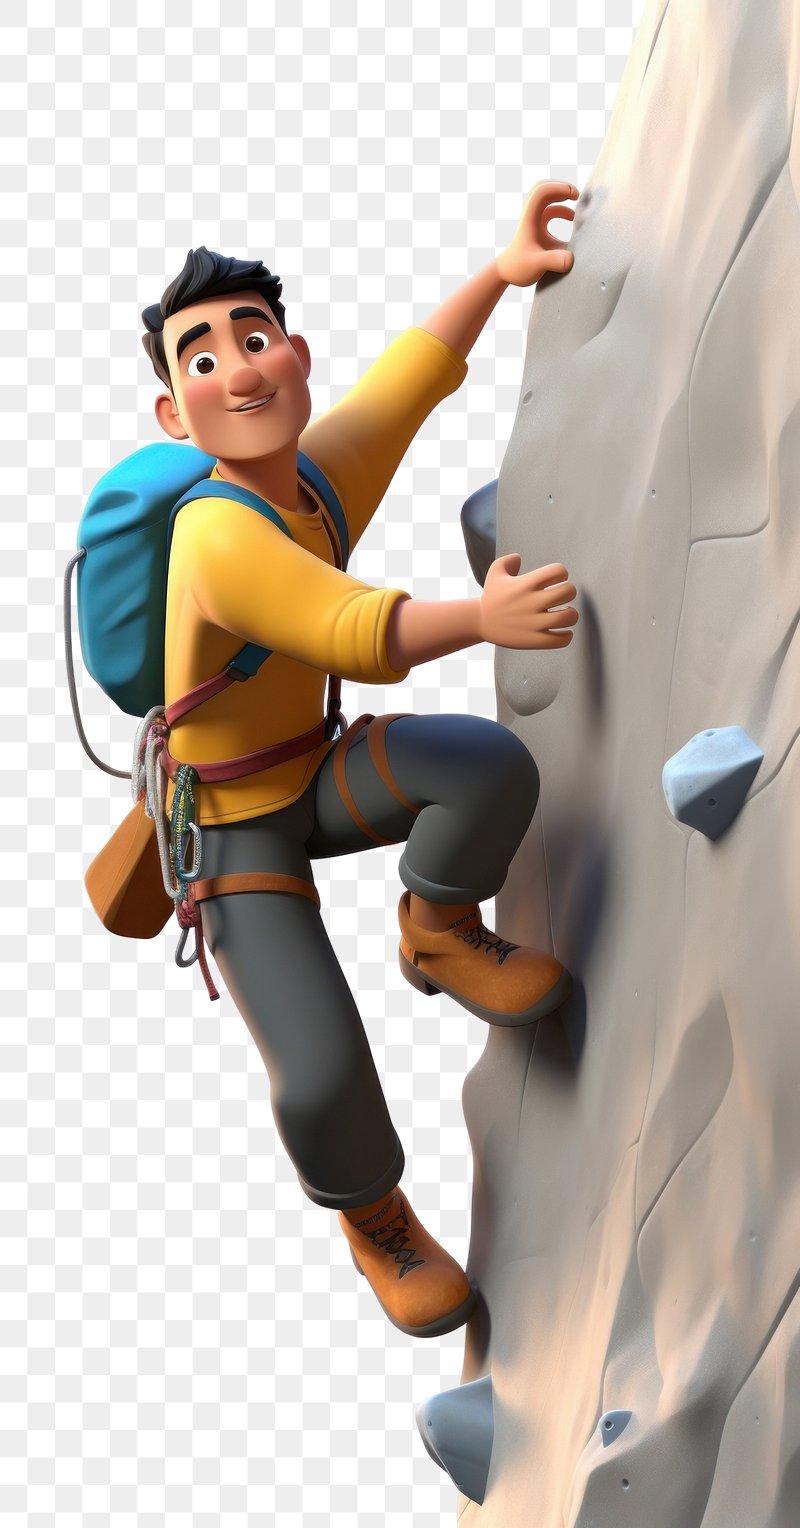 Rock Climbing Images  Free Photos, PNG Stickers, Wallpapers